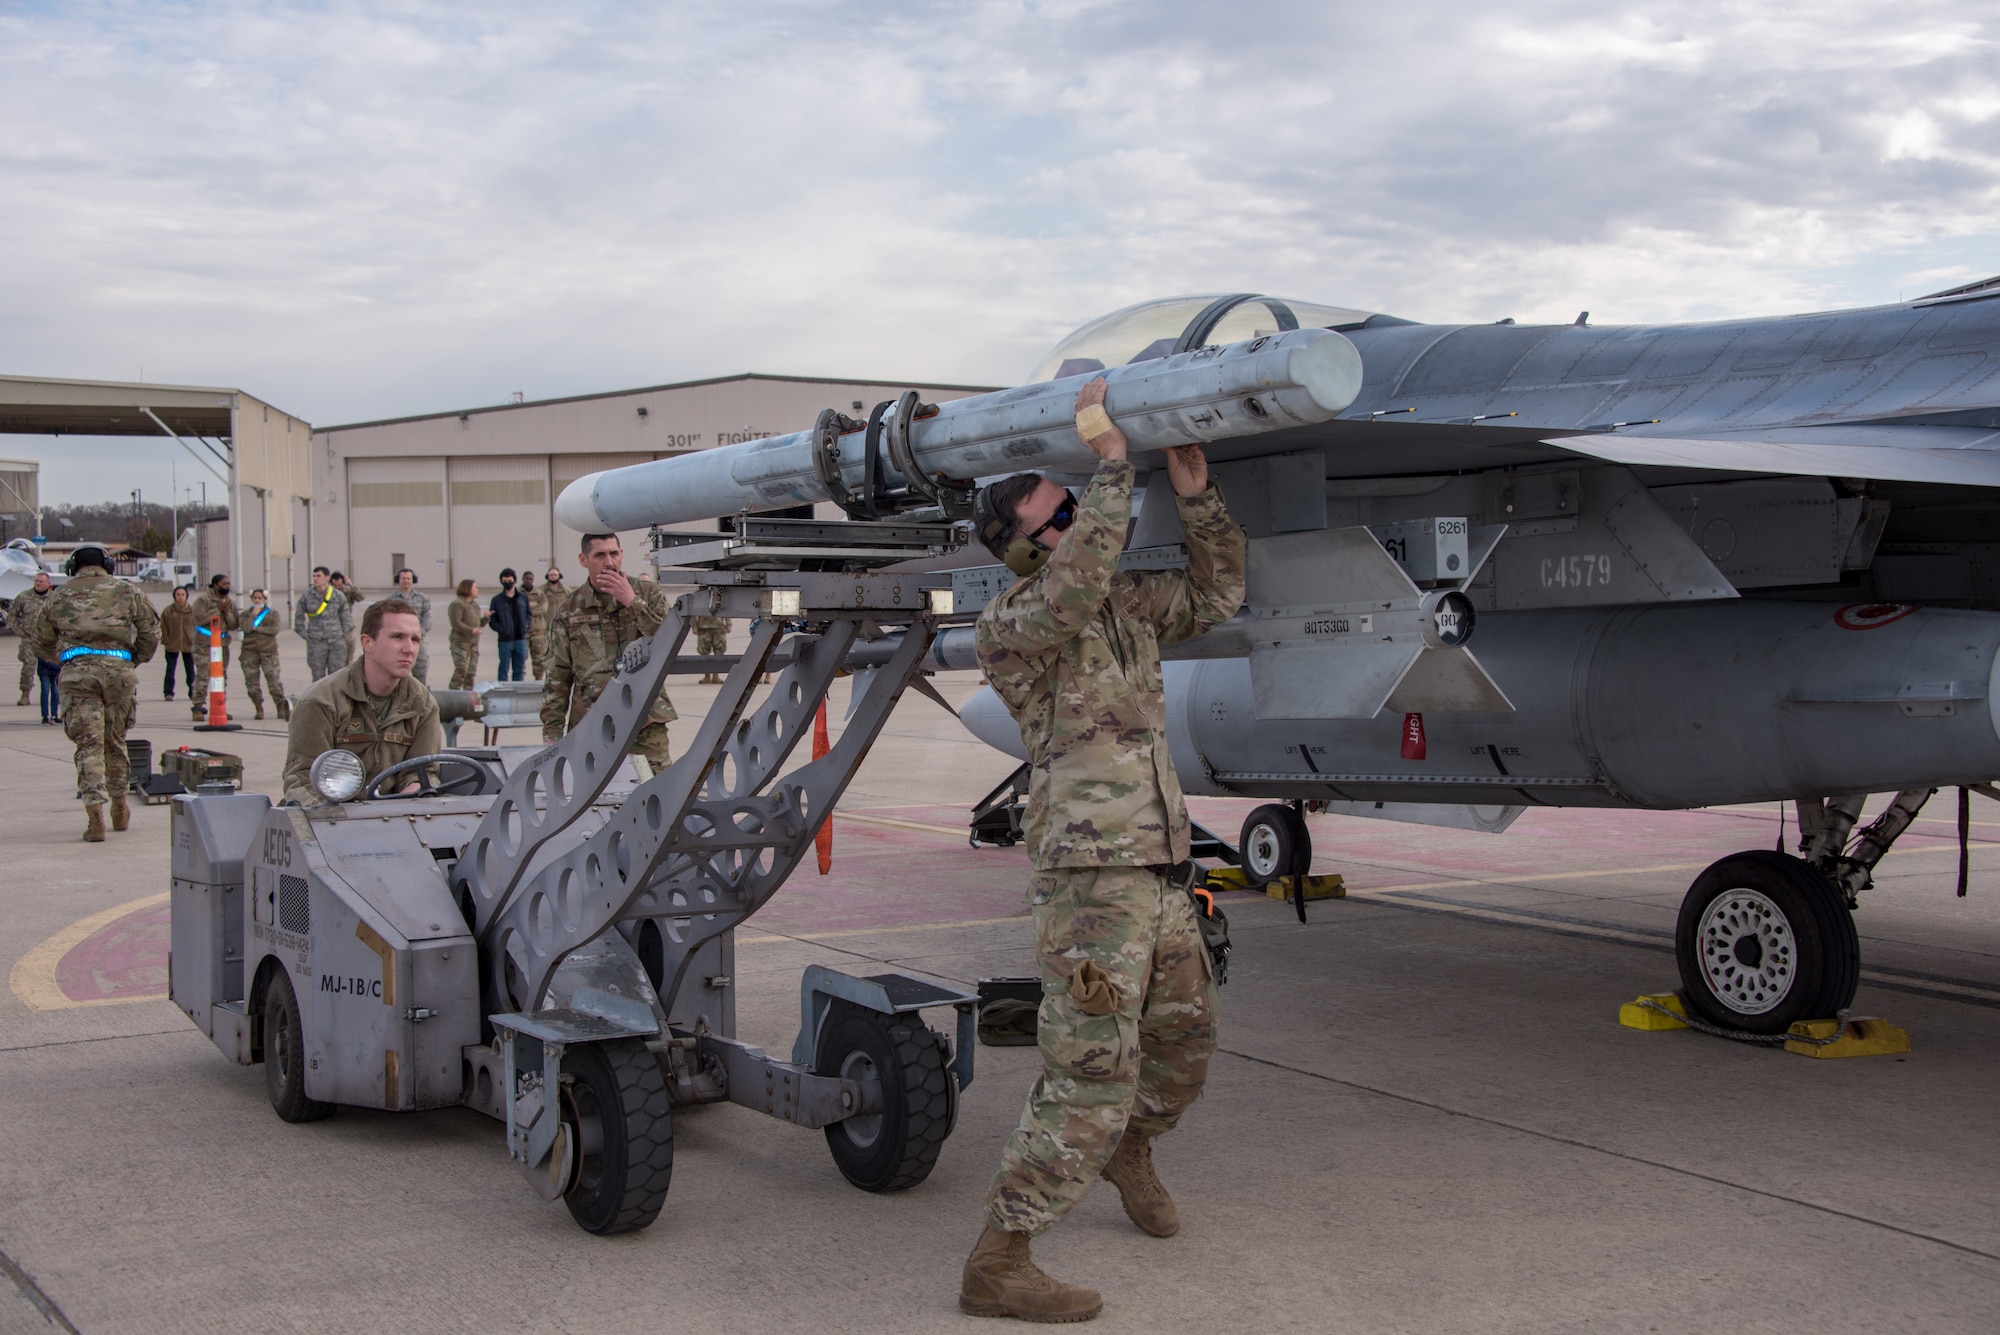 (Right) Tech. Sgt. Dalton King, 301st Fighter Wing Aircraft Maintenance Squadron load crew lead, lifts an AIM-120 missile, preparing to secure it to the 301st Fighter Wing’s F-16, as (left) Senior Airman Jaymes Fincher positions the weapons loader during a weapons load competition at U.S. Naval Air Station Joint Reserve Base Fort Worth, Texas on February 5, 2021. The competition consists of four, three-person AMXS load crews quickly uploading weapons on 301st Fighter Wing F-16s, while maintaining a strict attention to detail, with hopes of winning load crew of the year. (U.S. Air Force photo by Senior Airman William Downs)